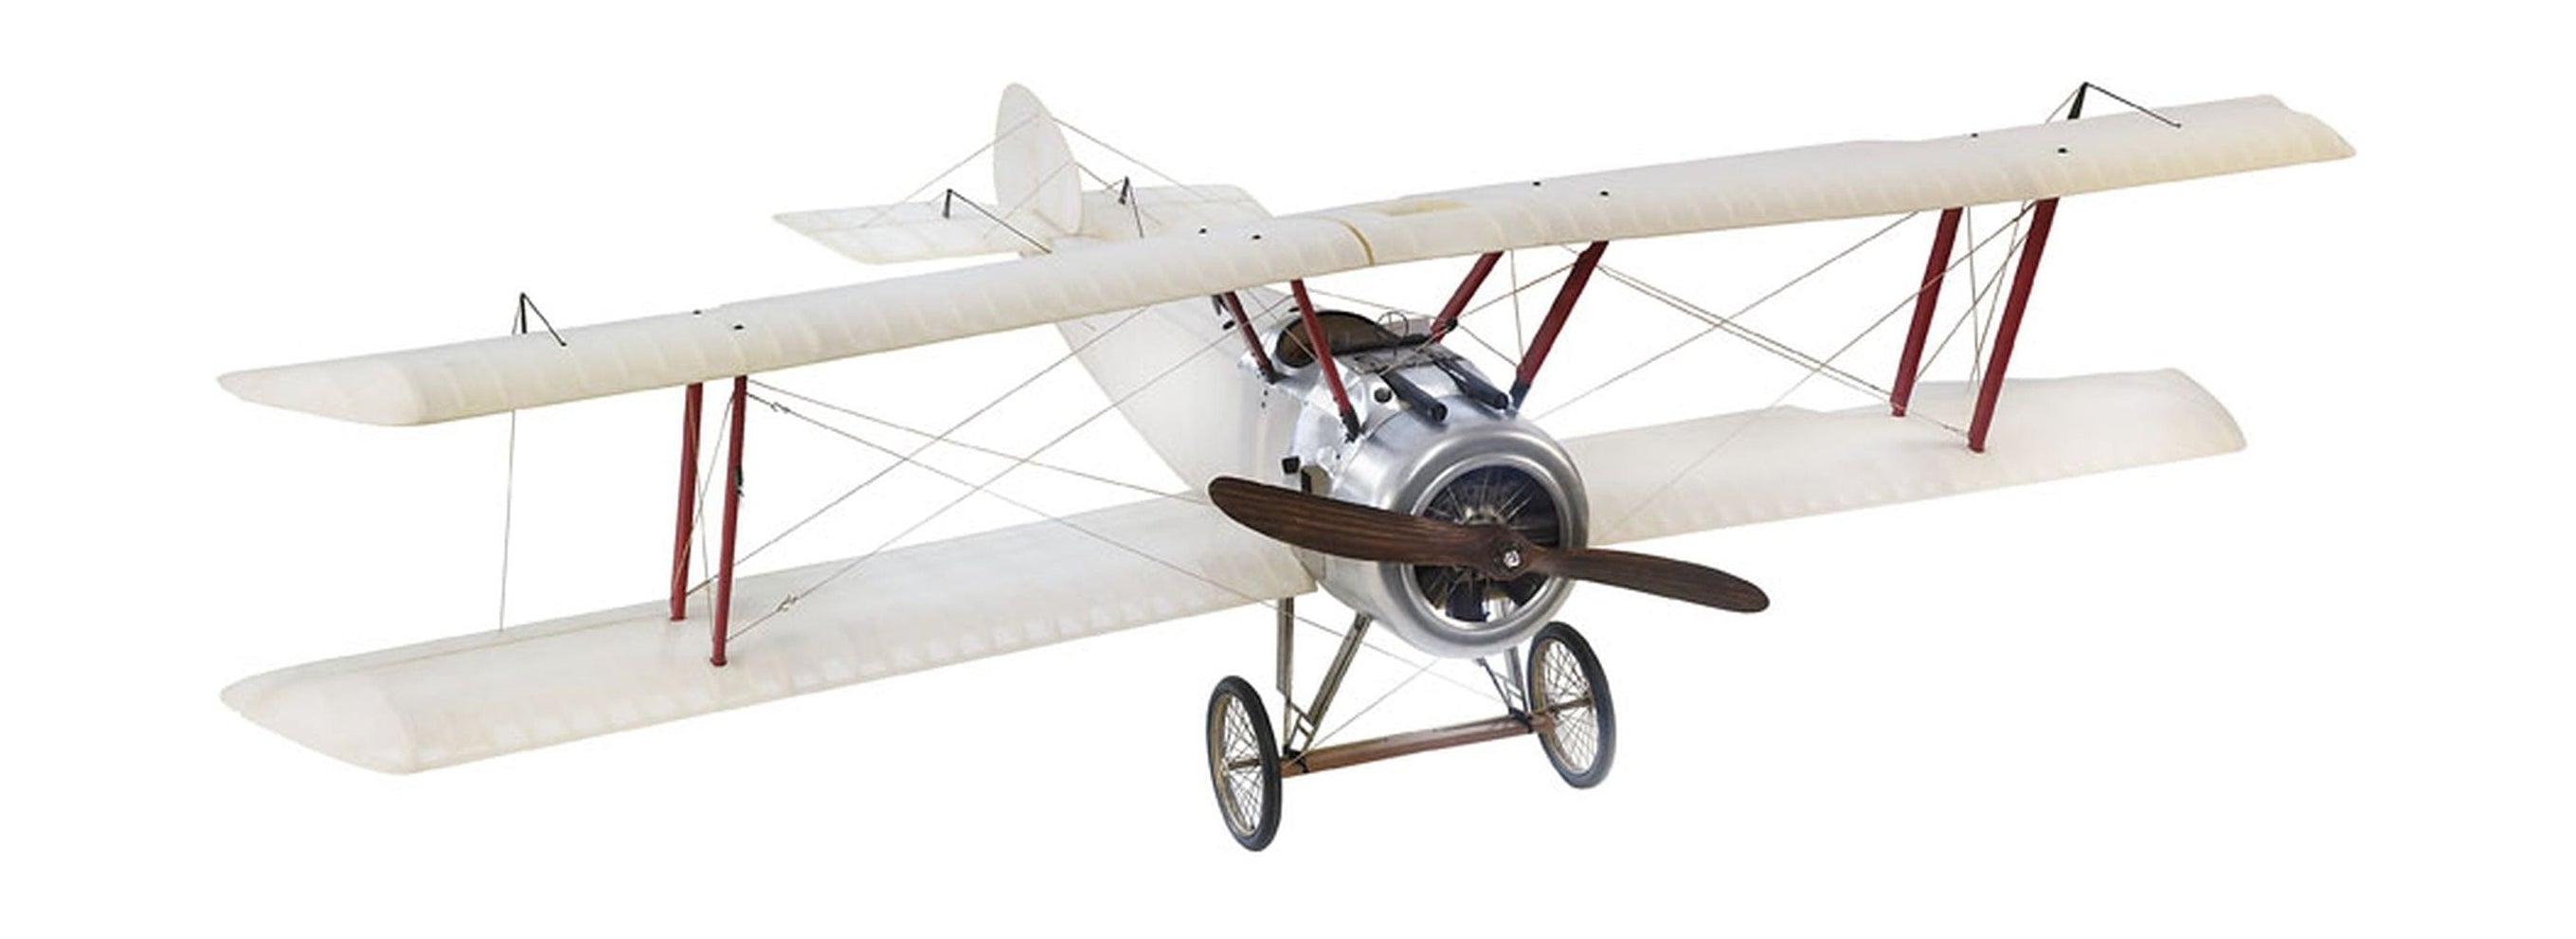 Authentic Models Sopwith Camel Transparent 2,5 m flygplansmodell